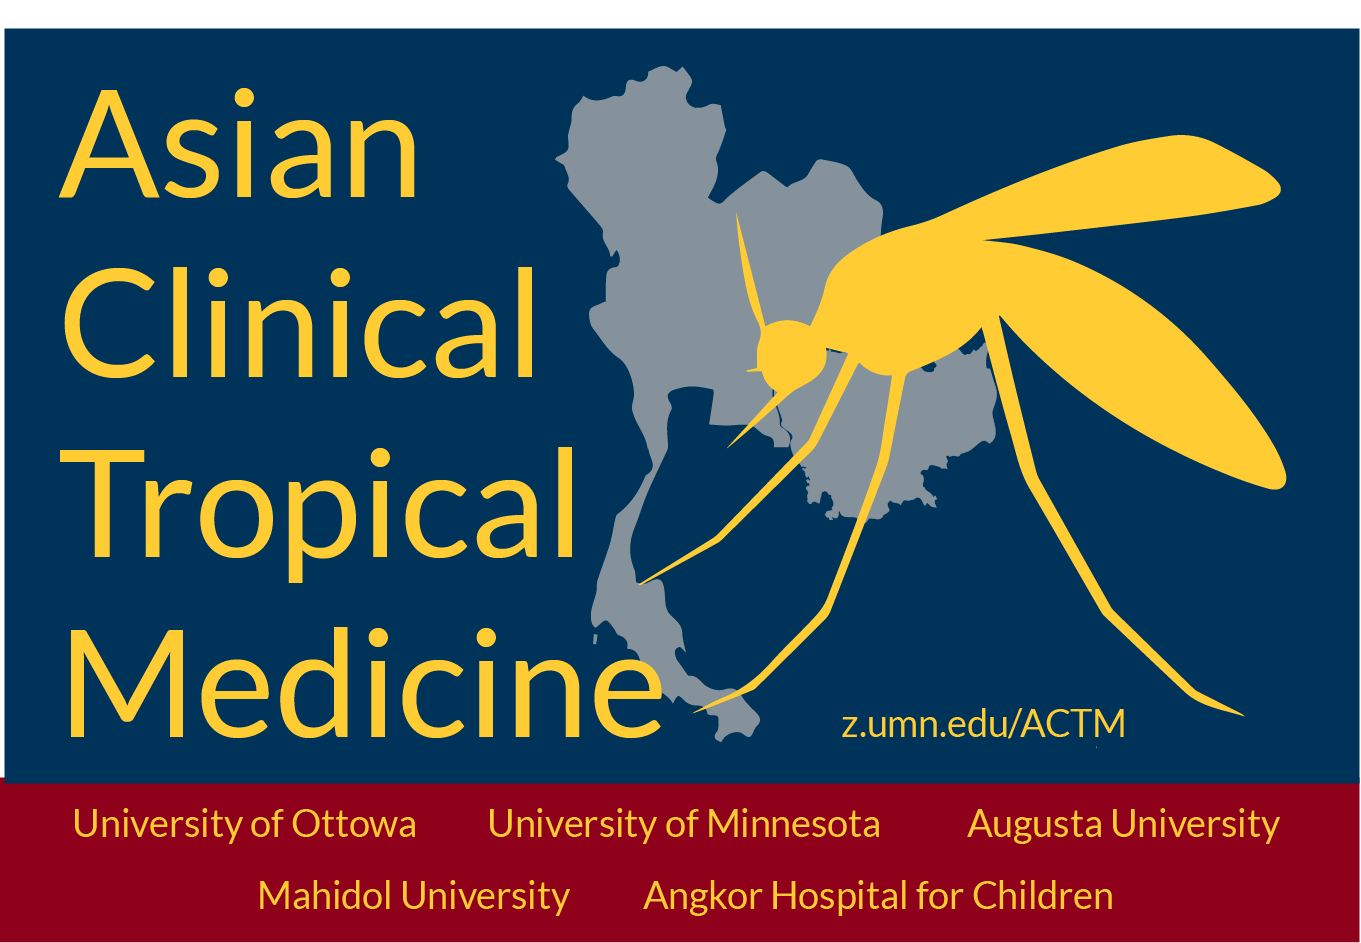 Asian Clinical Tropical Medicine - a joint offering from the University of Ottowa, University of Minnesota, Augusta University, Mahidol University, and Angkor Hospital for Children